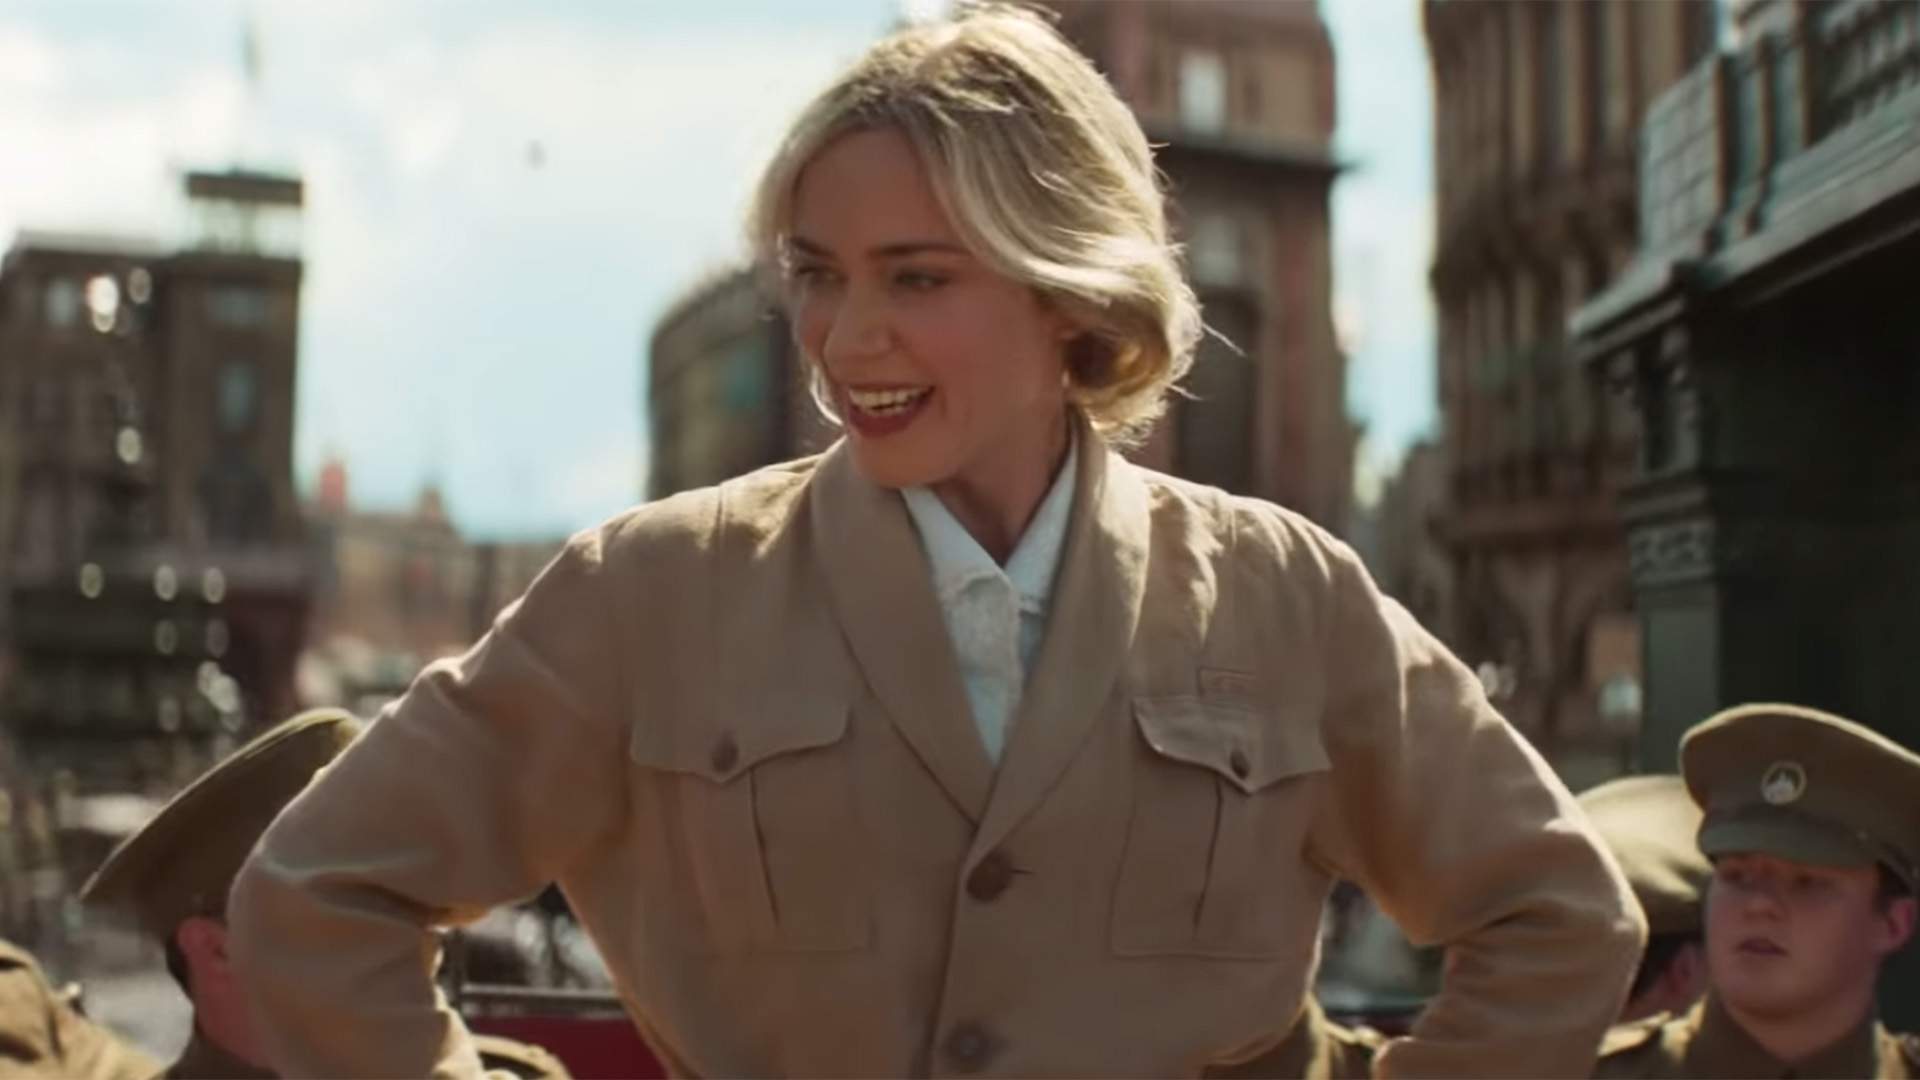 The First Trailer for 'Jungle Cruise' Takes Emily Blunt and Dwayne Johnson on a Wet and Wild Adventure